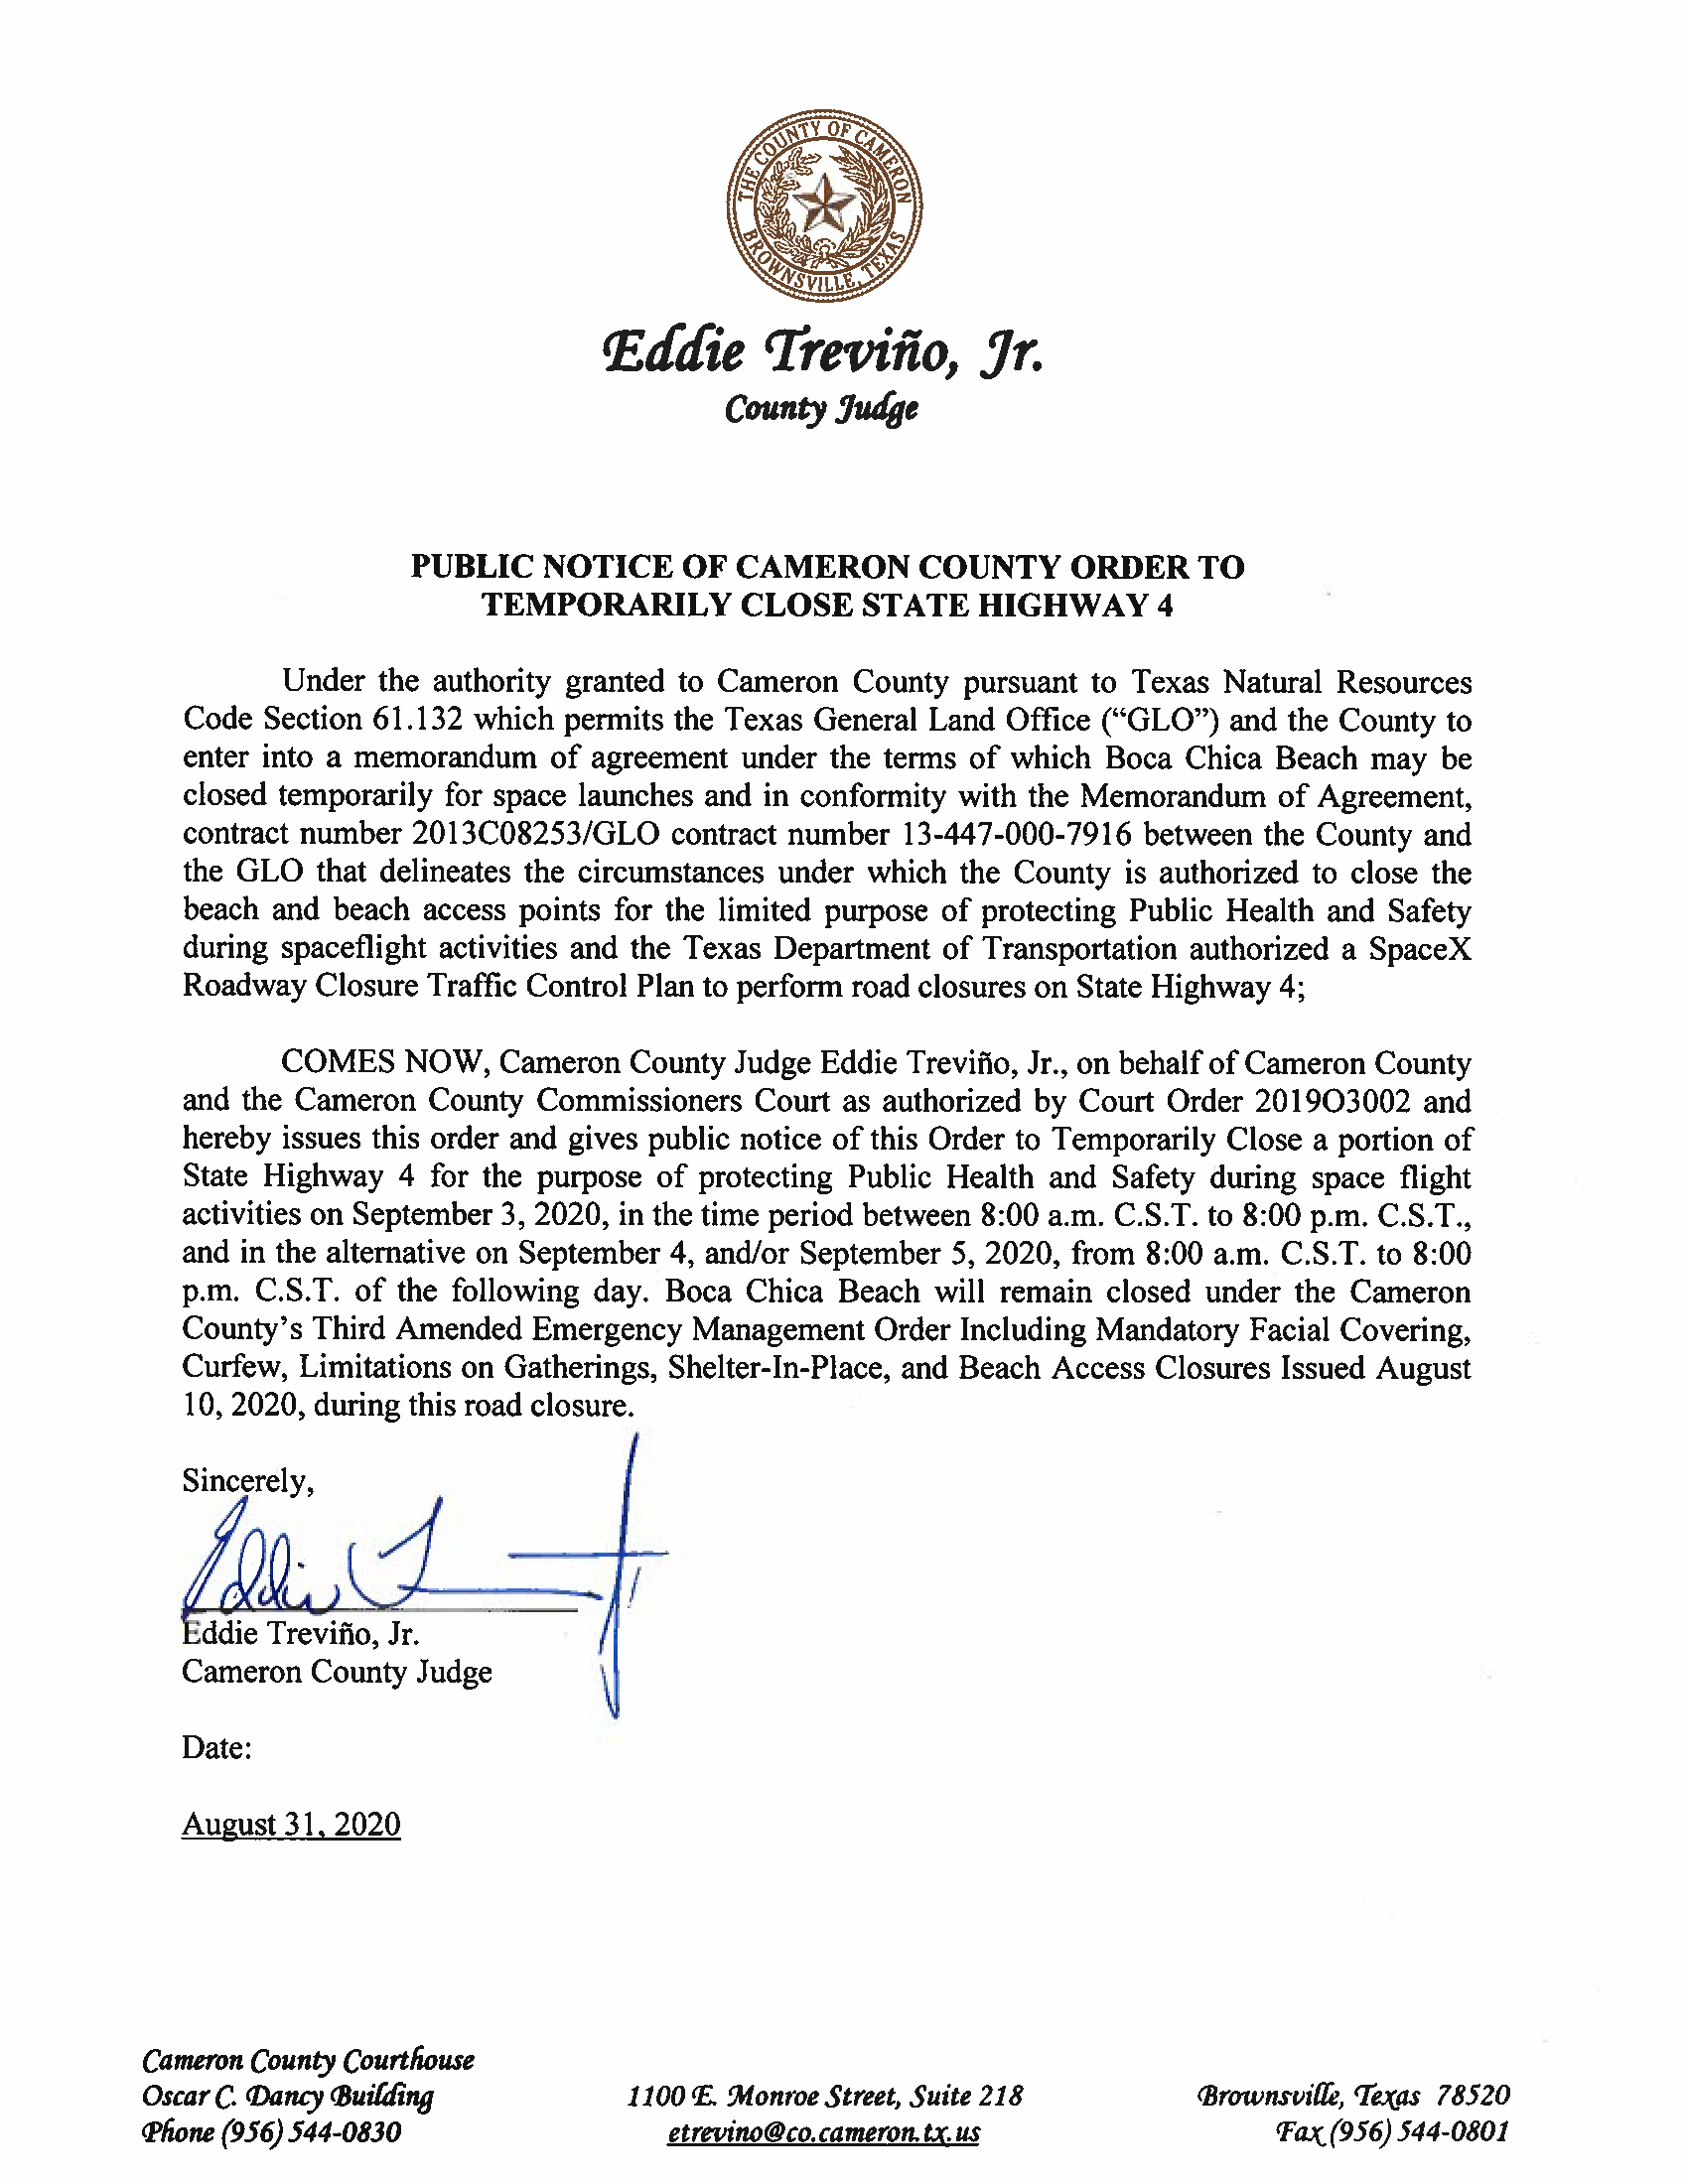 PUBLIC NOTICE OF CAMERON COUNTY ORDER TO TEMP. ROAD CLOSURE. 09.03.20.docx Page 1